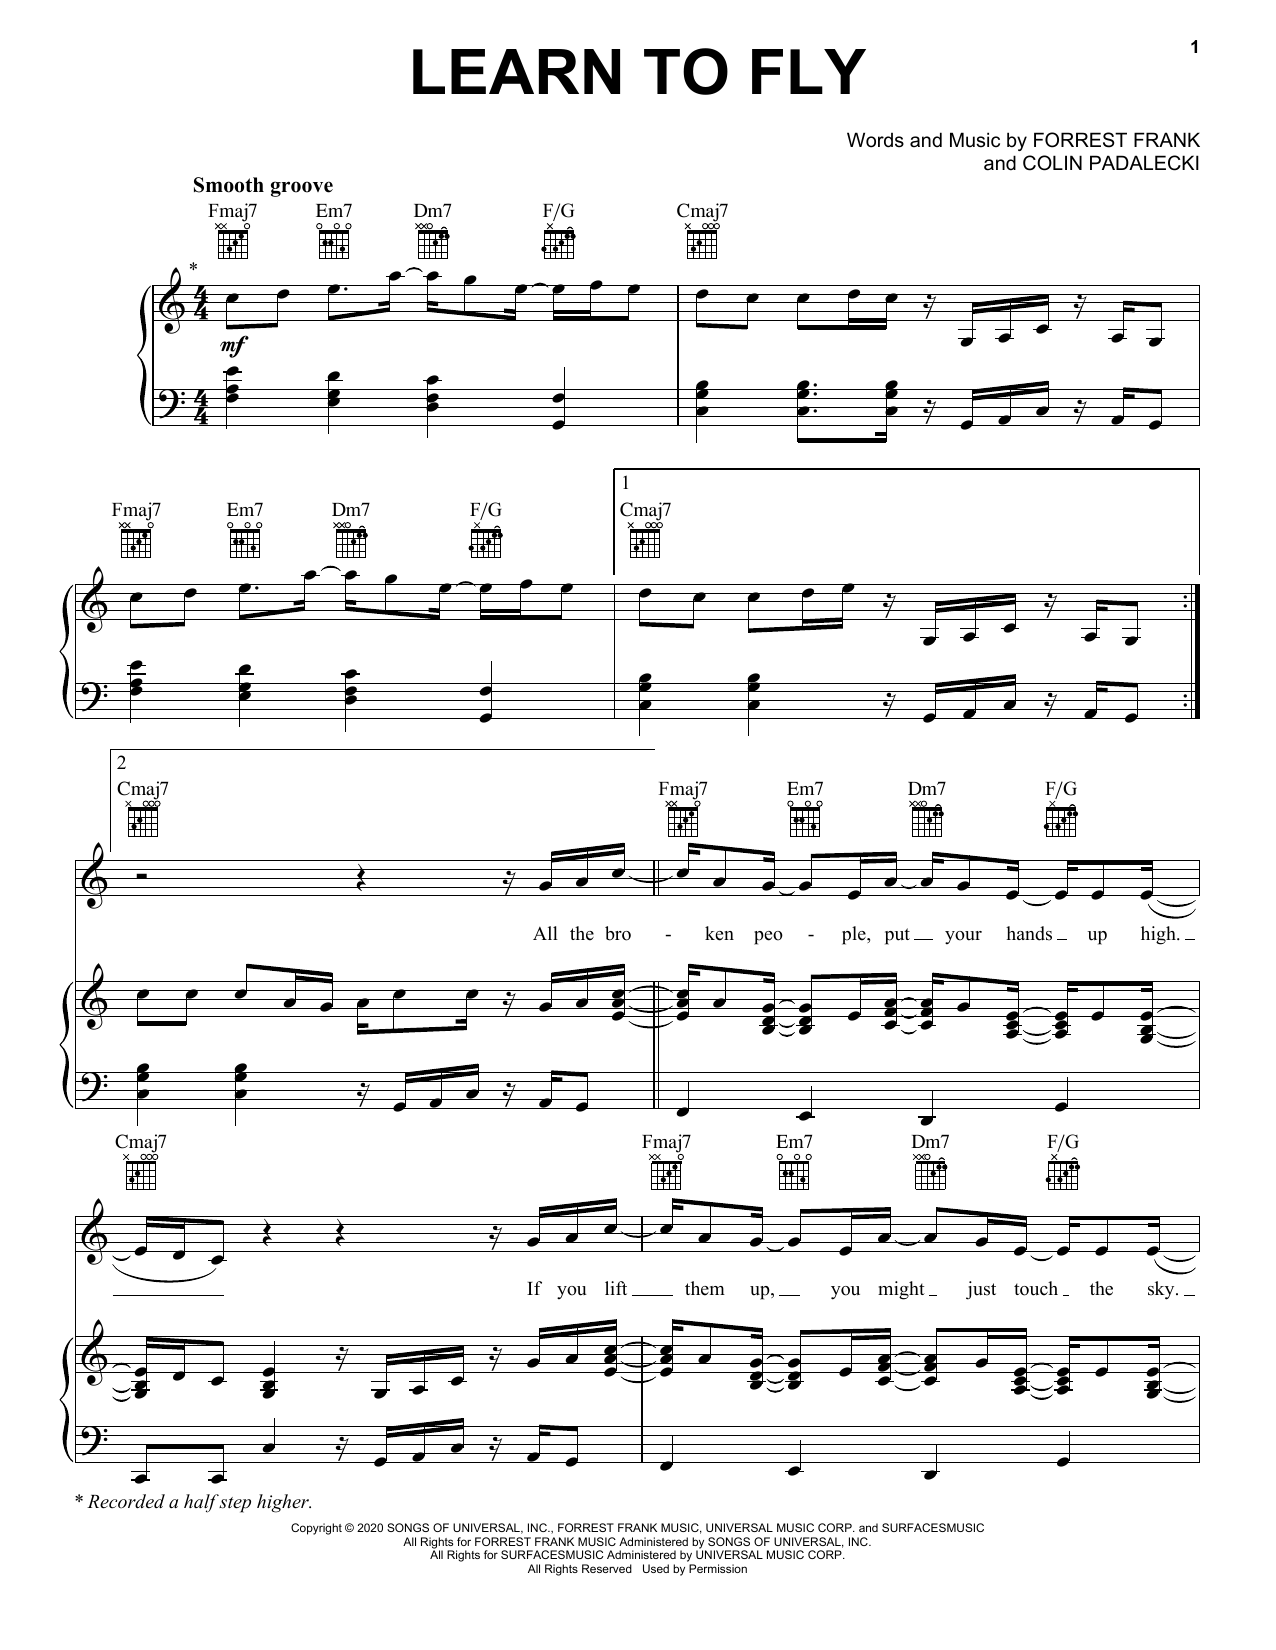 Download Surfaces & Elton John Learn To Fly Sheet Music